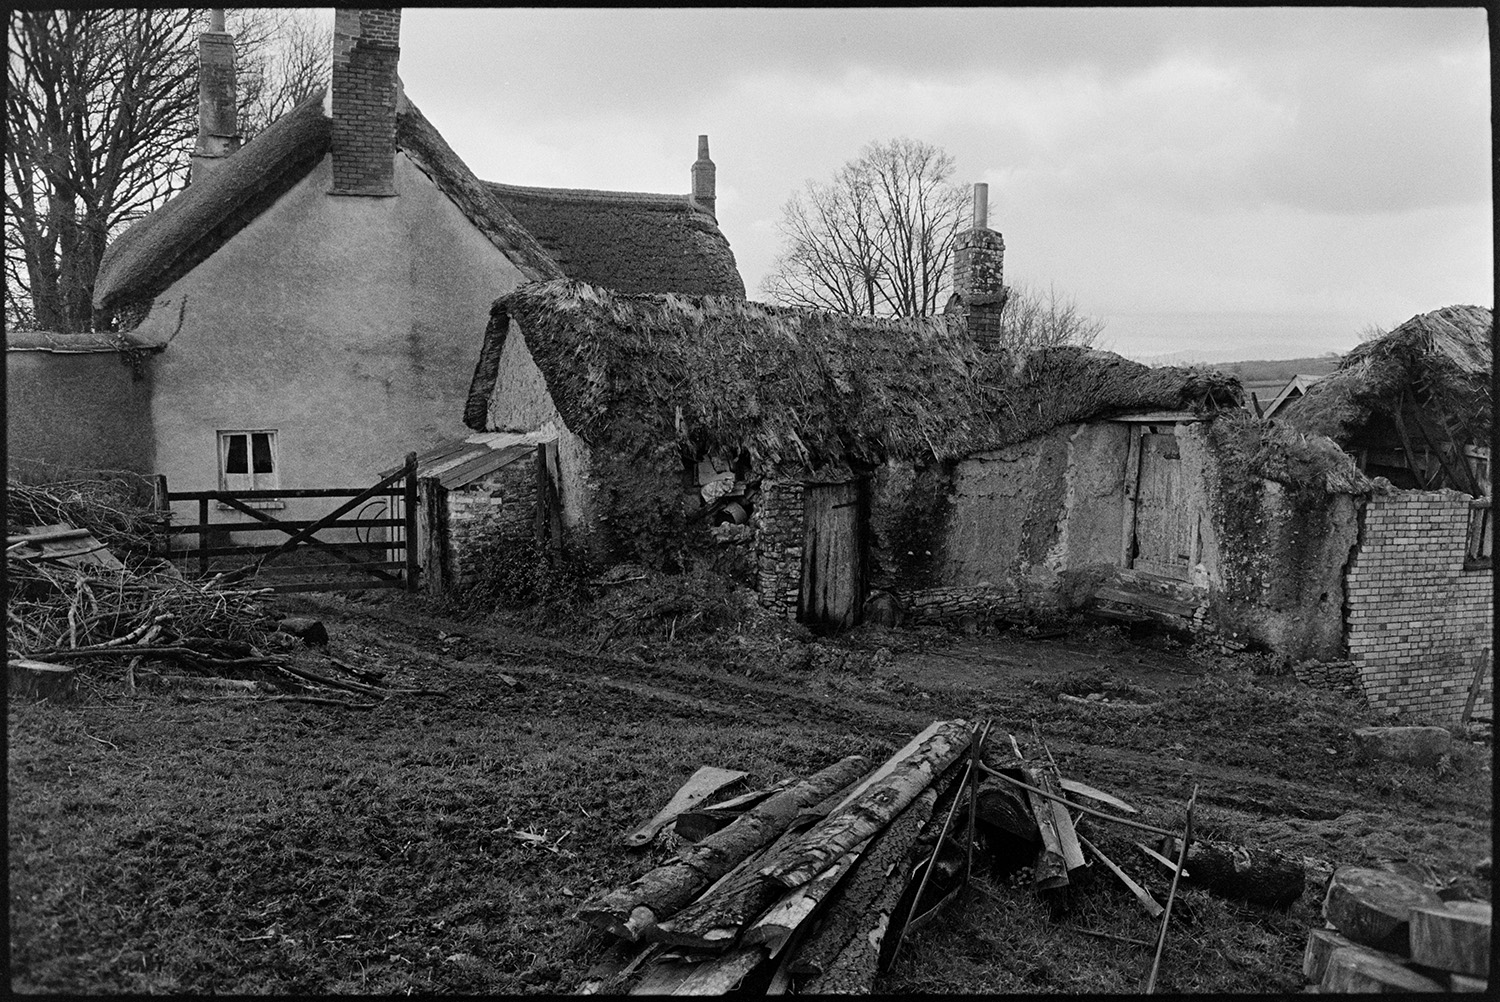 Farmyard with ancient ruined barns, cob and thatch. 
[Bridgetown farmyard with a collapsing thatched barn. A log pile is visible in the foreground and the thatched farmhouse can be seen in the background.]